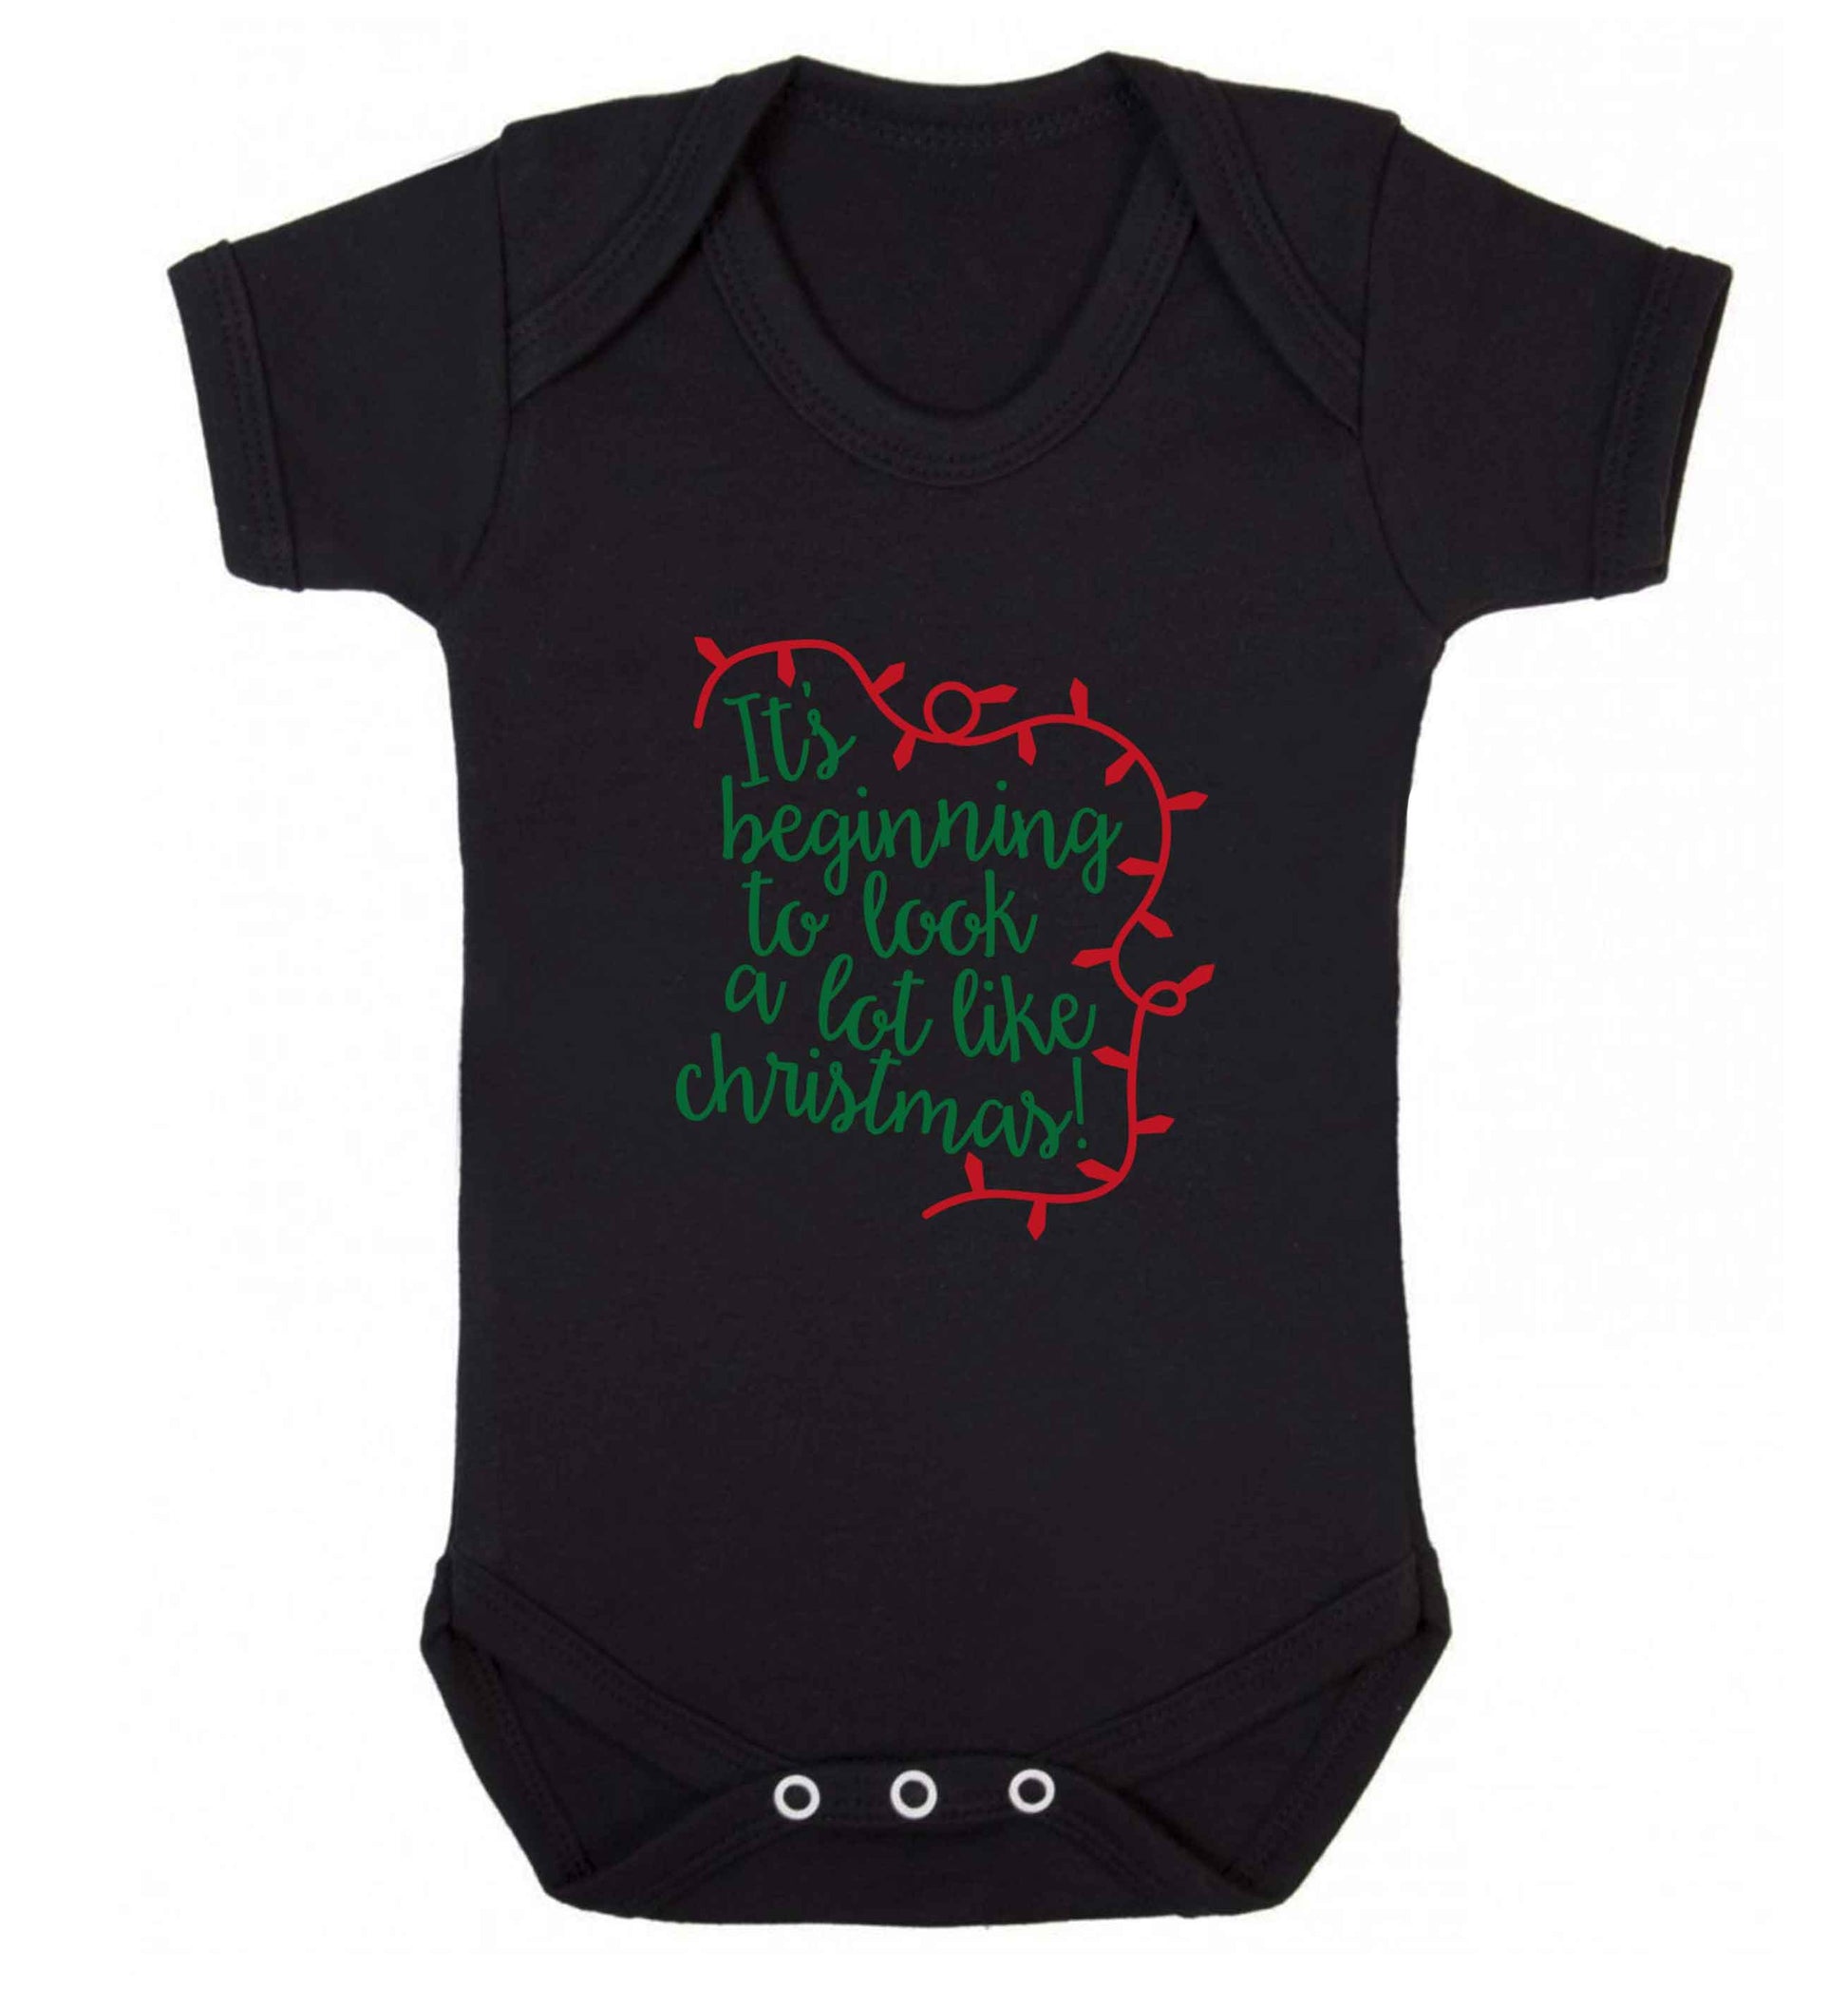 It's beginning to look a lot like Christmas baby vest black 18-24 months